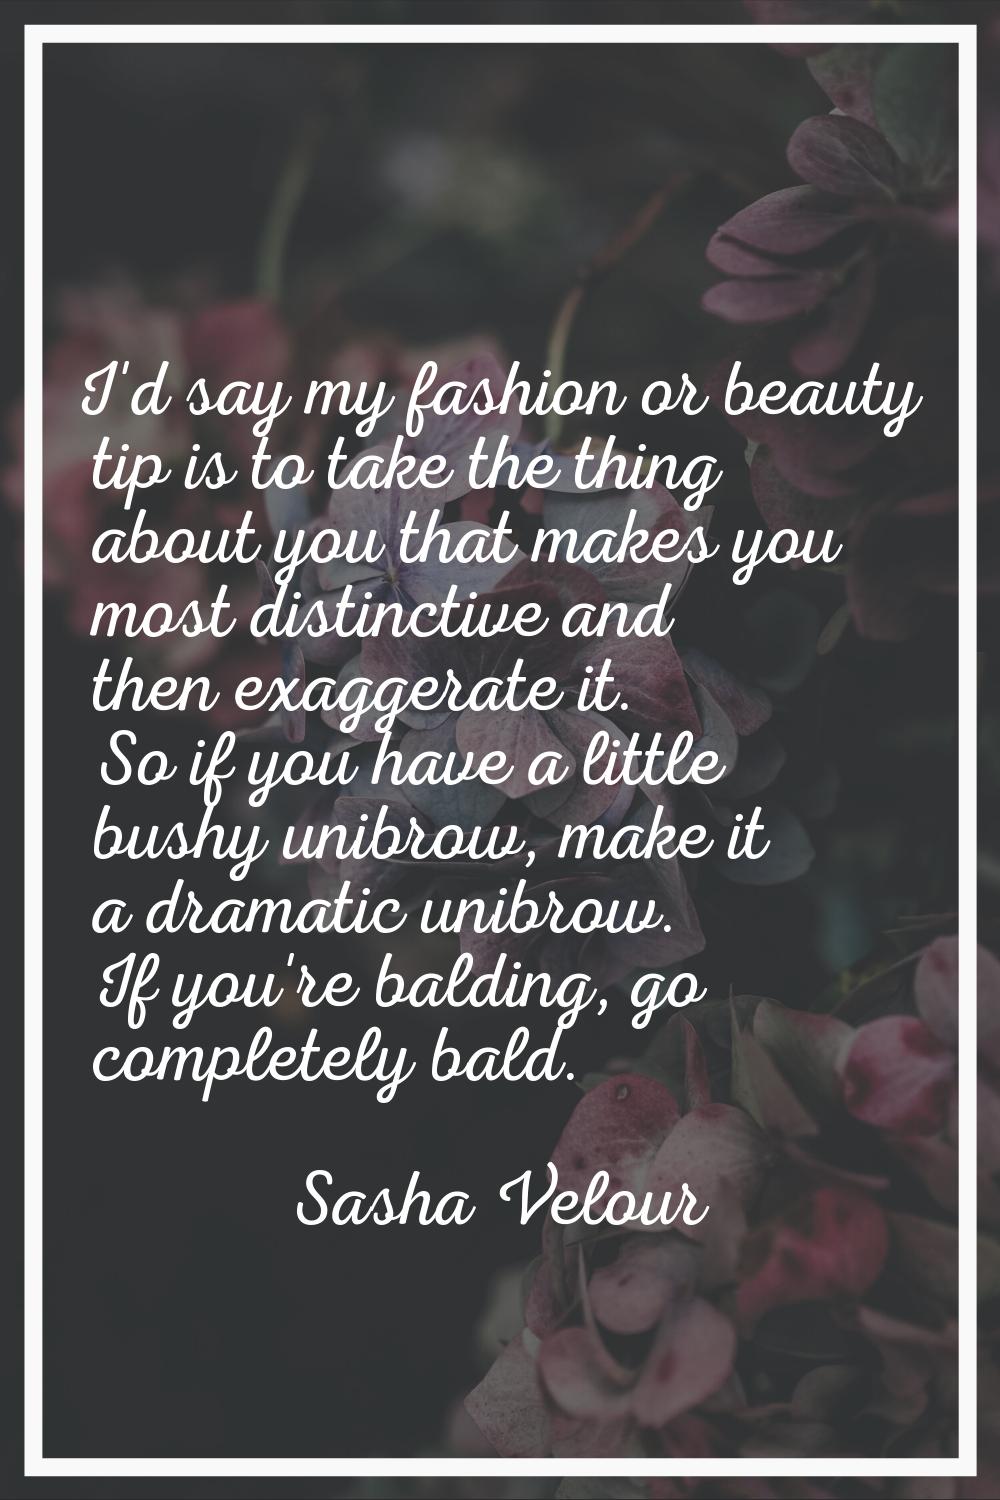 I'd say my fashion or beauty tip is to take the thing about you that makes you most distinctive and